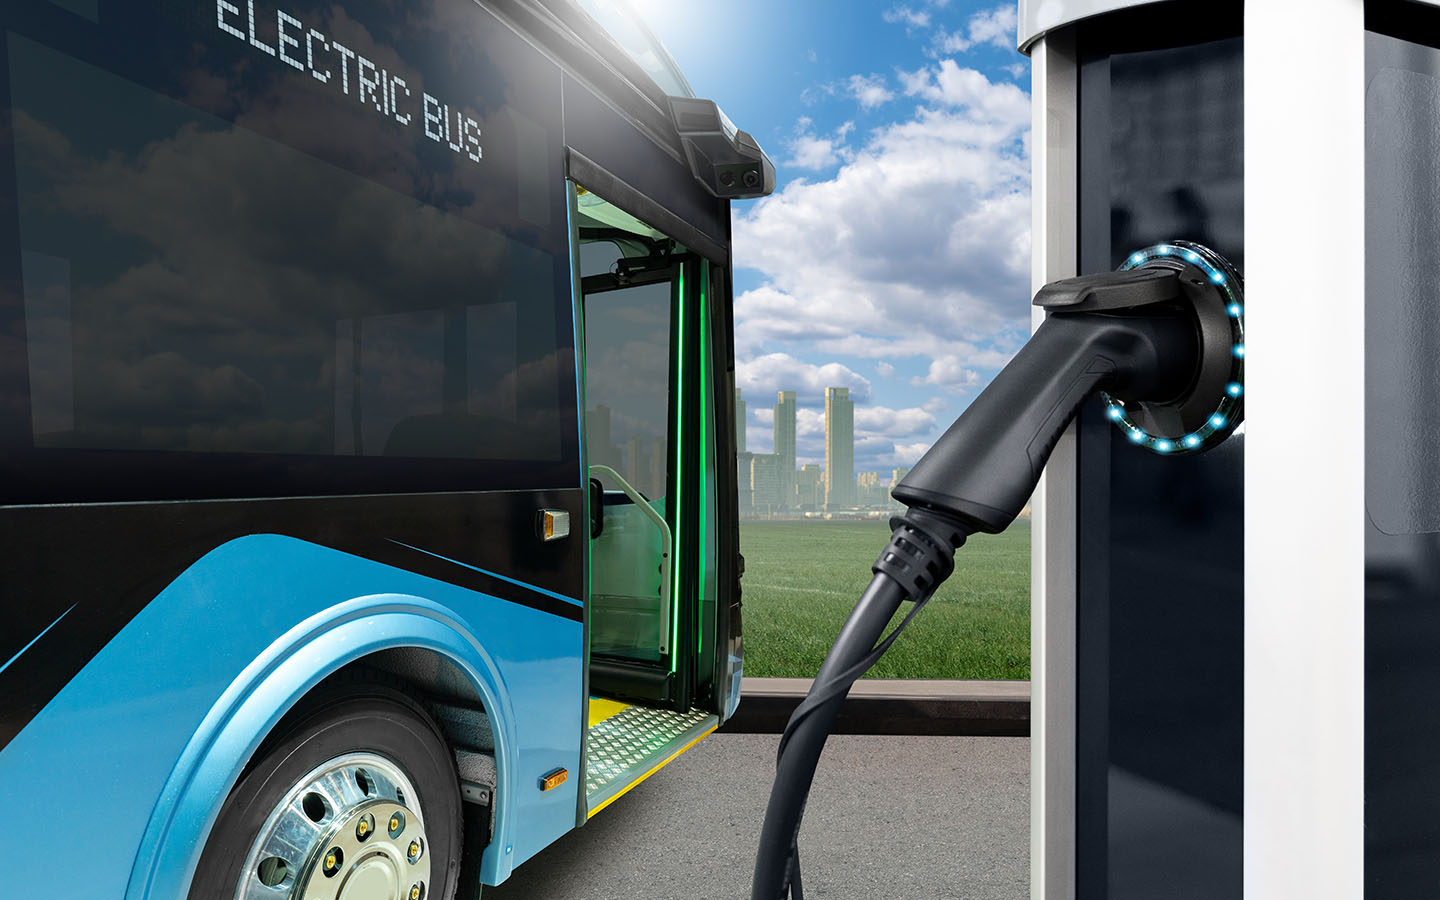 electric buses help to reduce carbon emissions